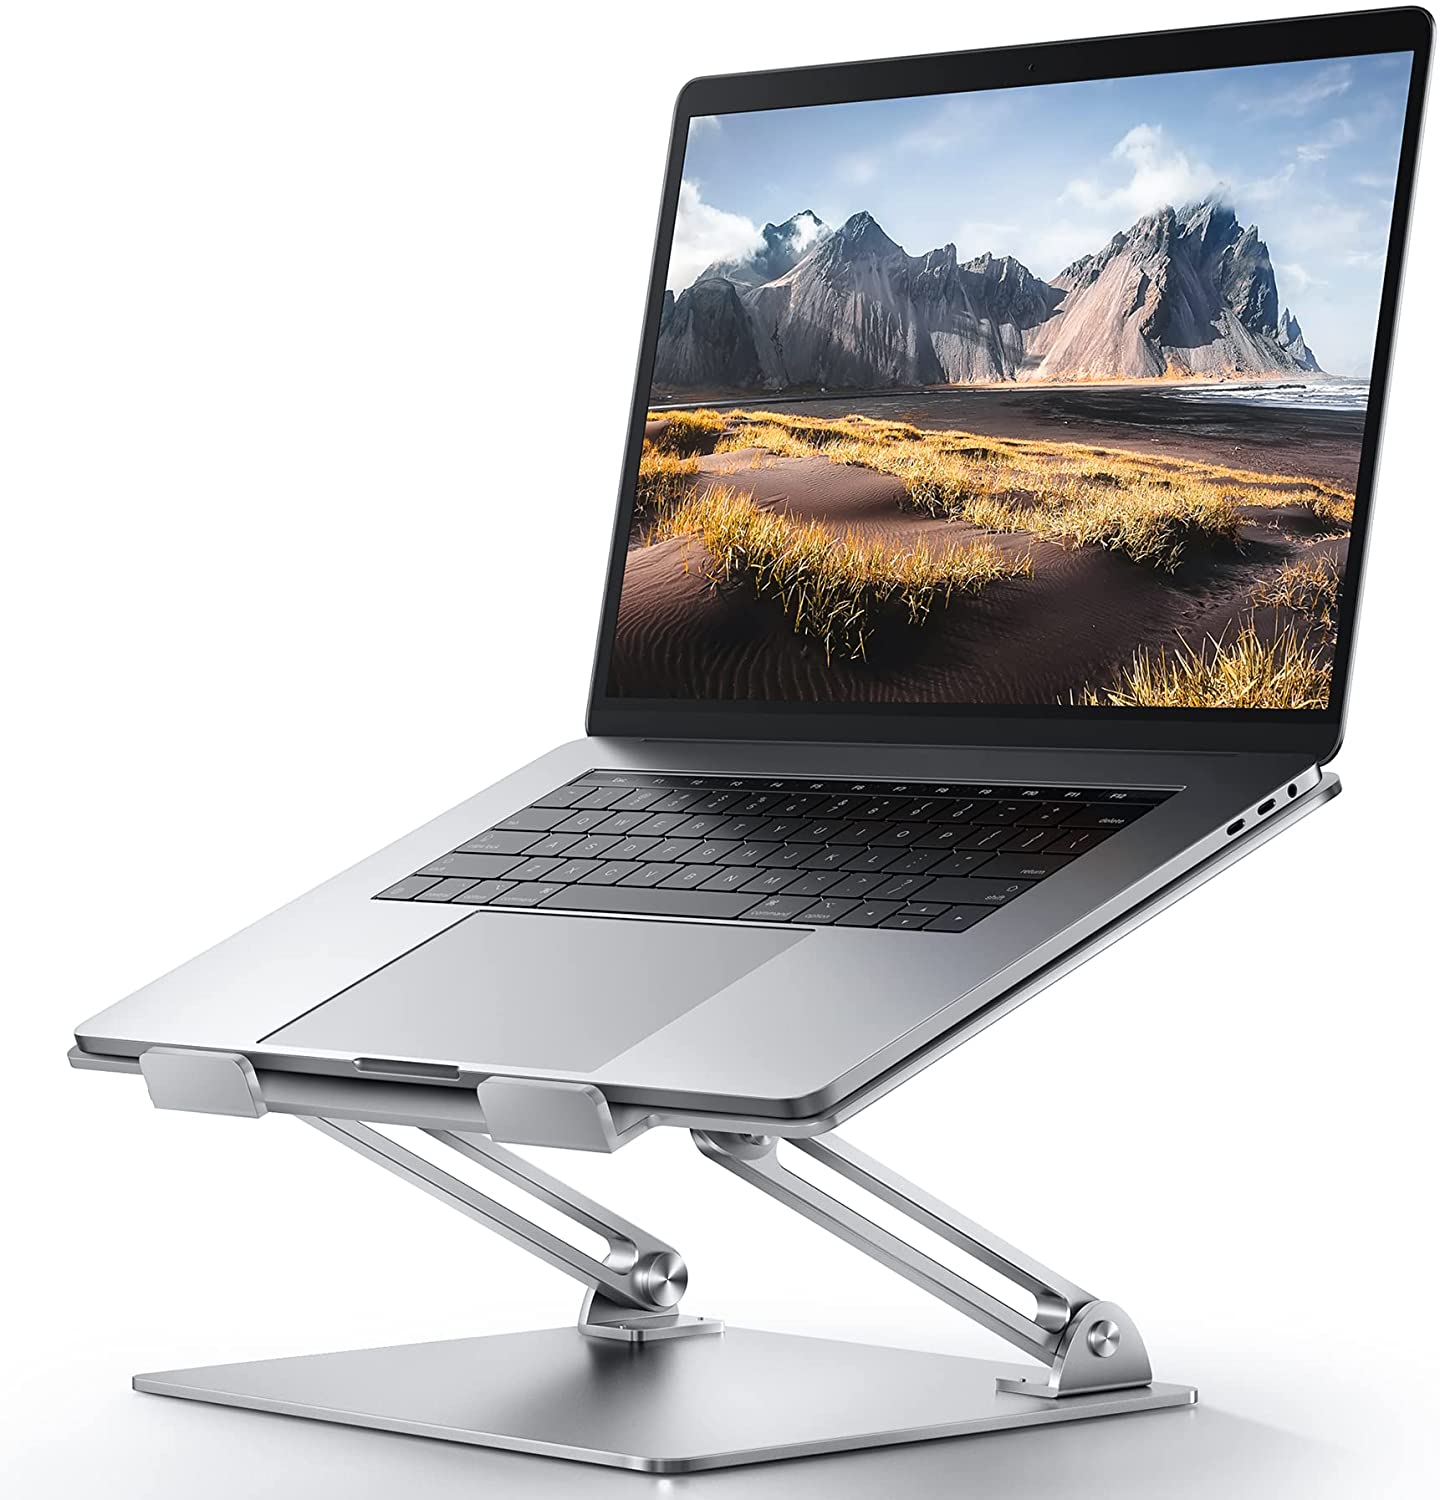 Adjustable Laptop Stand For Desk, Ergonomic Portable Computer Stand Aluminum Laptop Holder with Heat-Vent to Elevate Laptop, MacBook, Air, Pro, Dell XPS, Samsung, 11-17 plg All Laptop Stand Holder